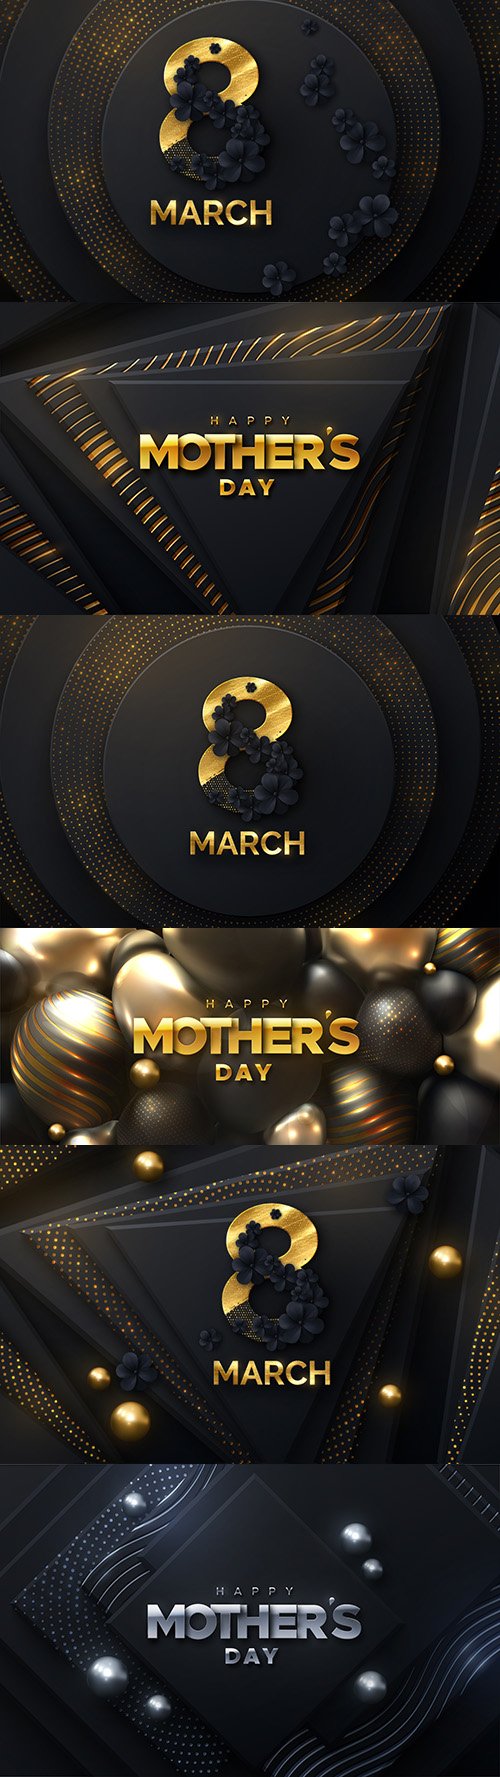 Mother's day and March 8 dark gold design